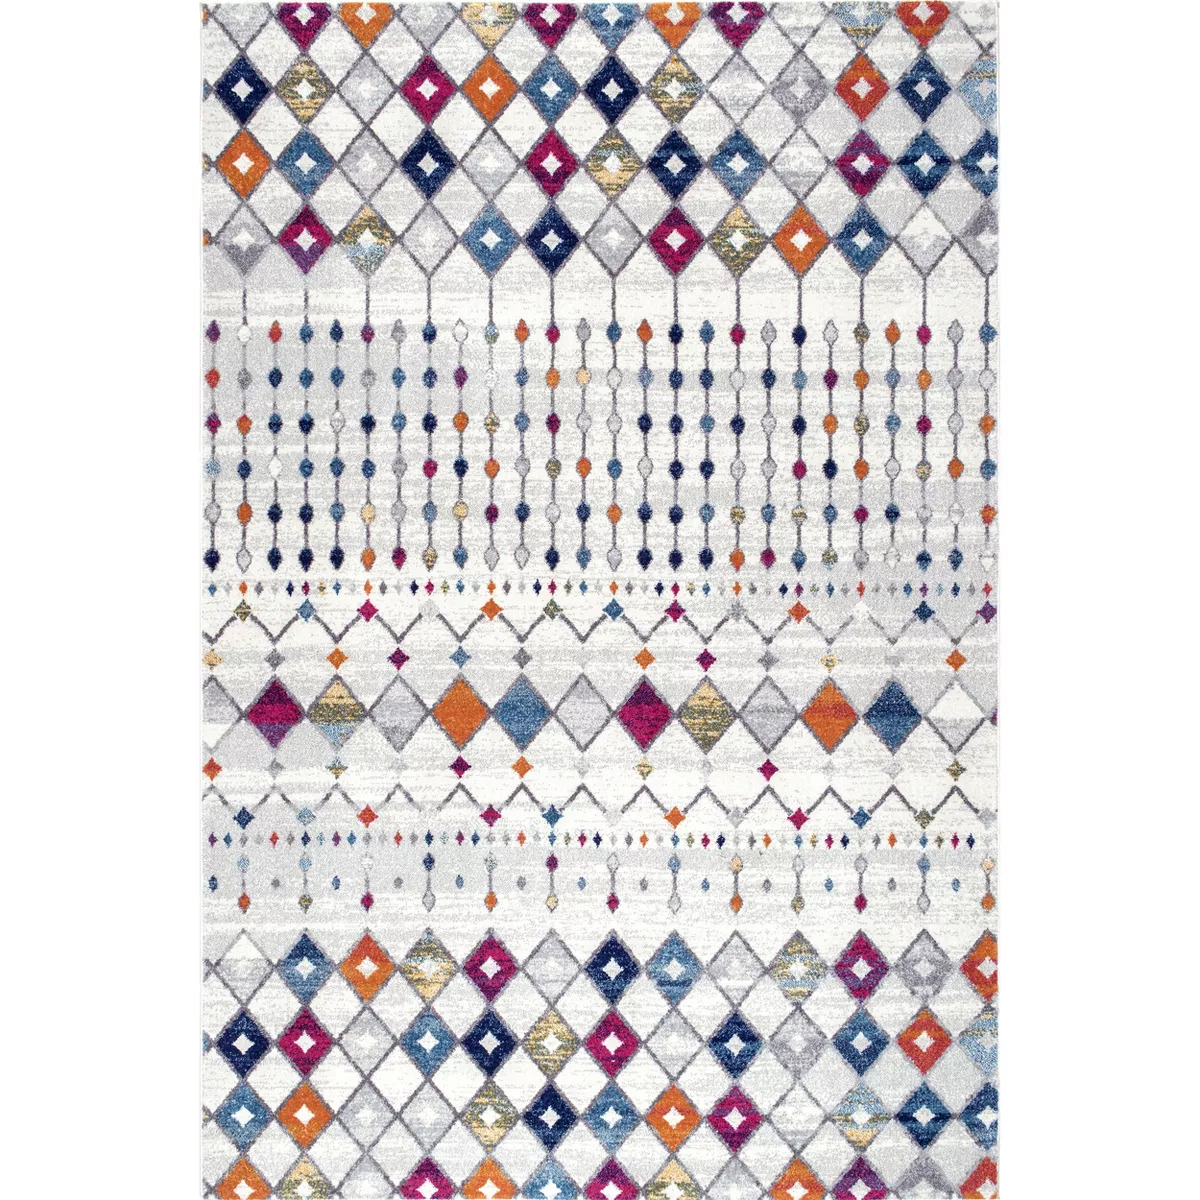 5' x 7'5" Nuloom Moroccan Blythe Area Rug $37.33 & More + Free Shipping w/ RedCard or on $35+